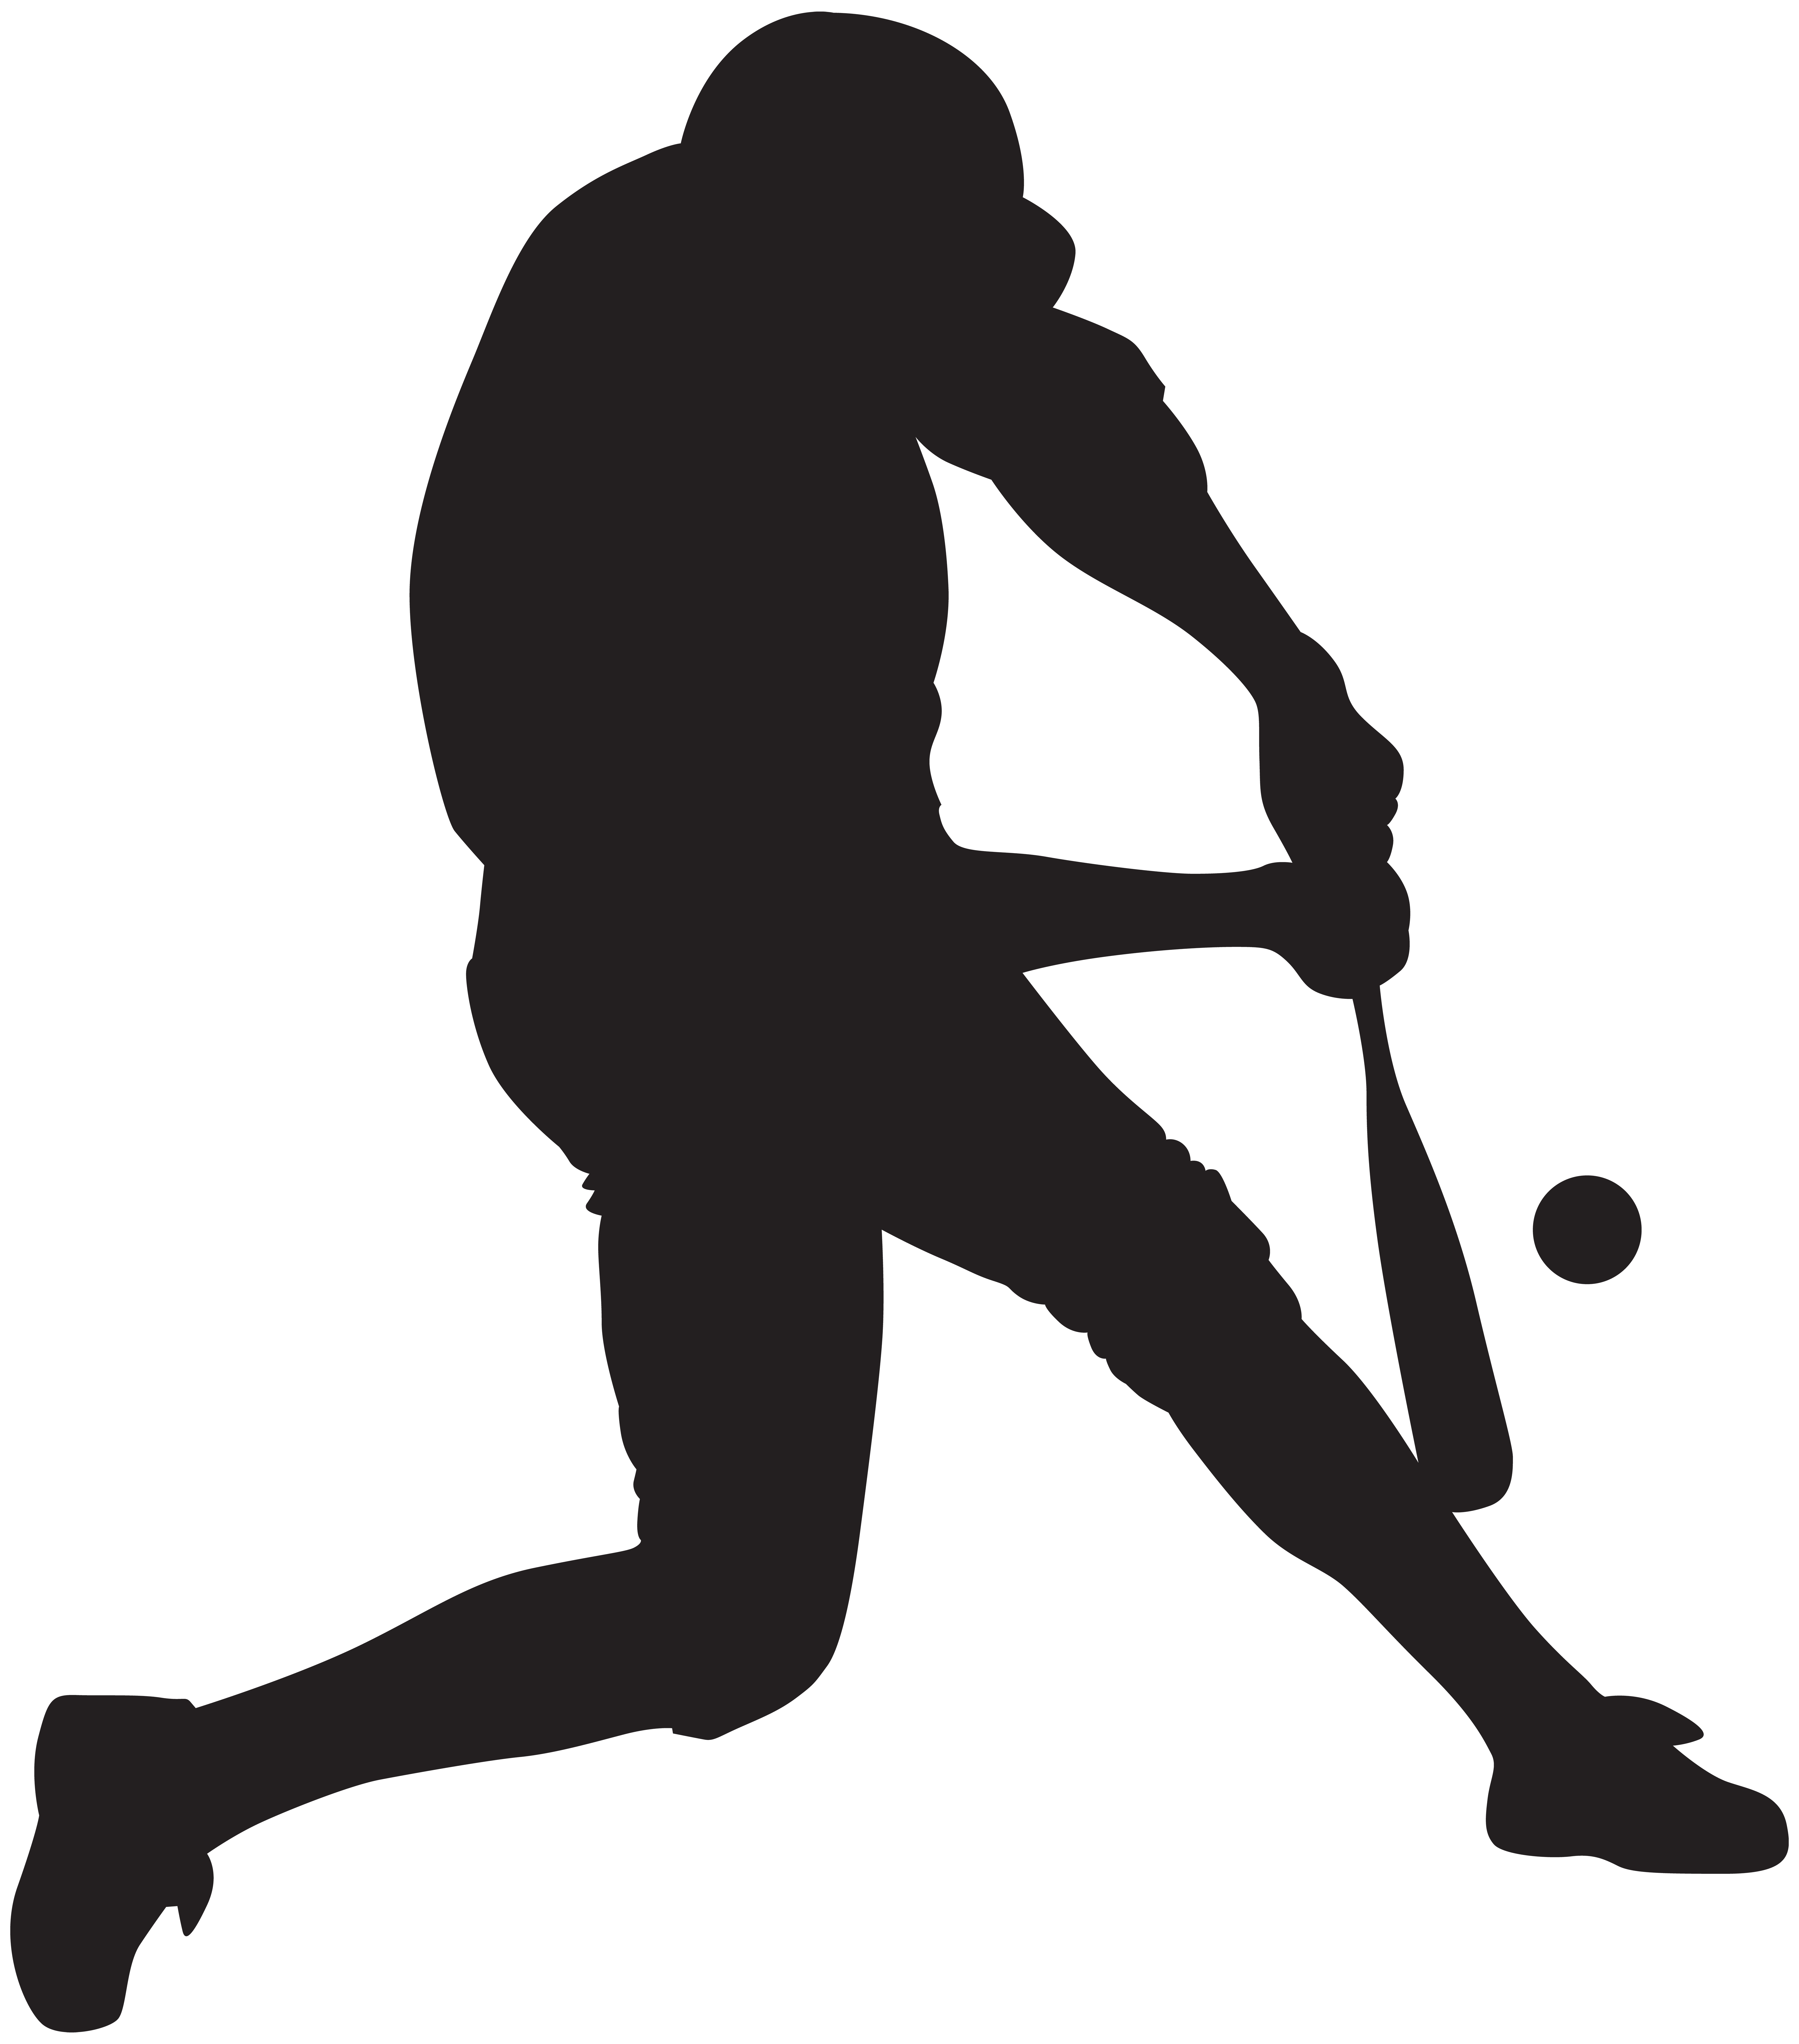 Baseball Player Silhouette PNG Clip Art Image